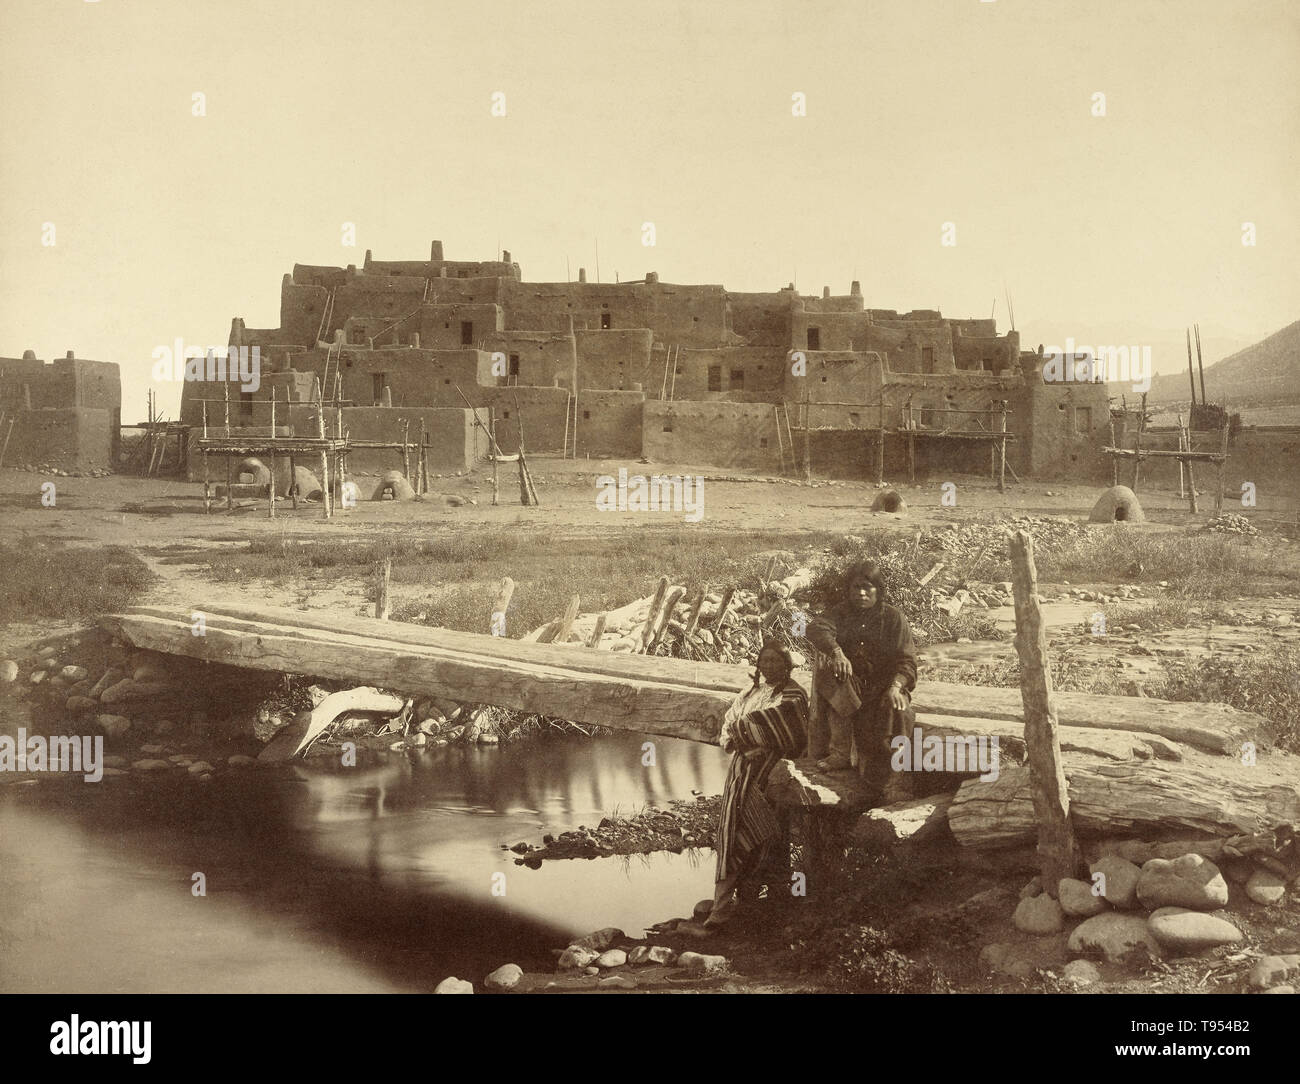 Pueblo de Taos, Northern New Mexico, Denver and Rio Grande Railway. William Henry Jackson (American, 1843 - 1942); 1880; Albumen silver print. Taos Pueblo (or Pueblo de Taos) is an ancient pueblo belonging to a Tiwa-speaking Native American tribe of Puebloan people. It lies about 1 mile north of the modern city of Taos, New Mexico, USA. The pueblos are considered to be one of the oldest continuously inhabited communities in the United States. This has been designated a UNESCO World Heritage Site. Stock Photo